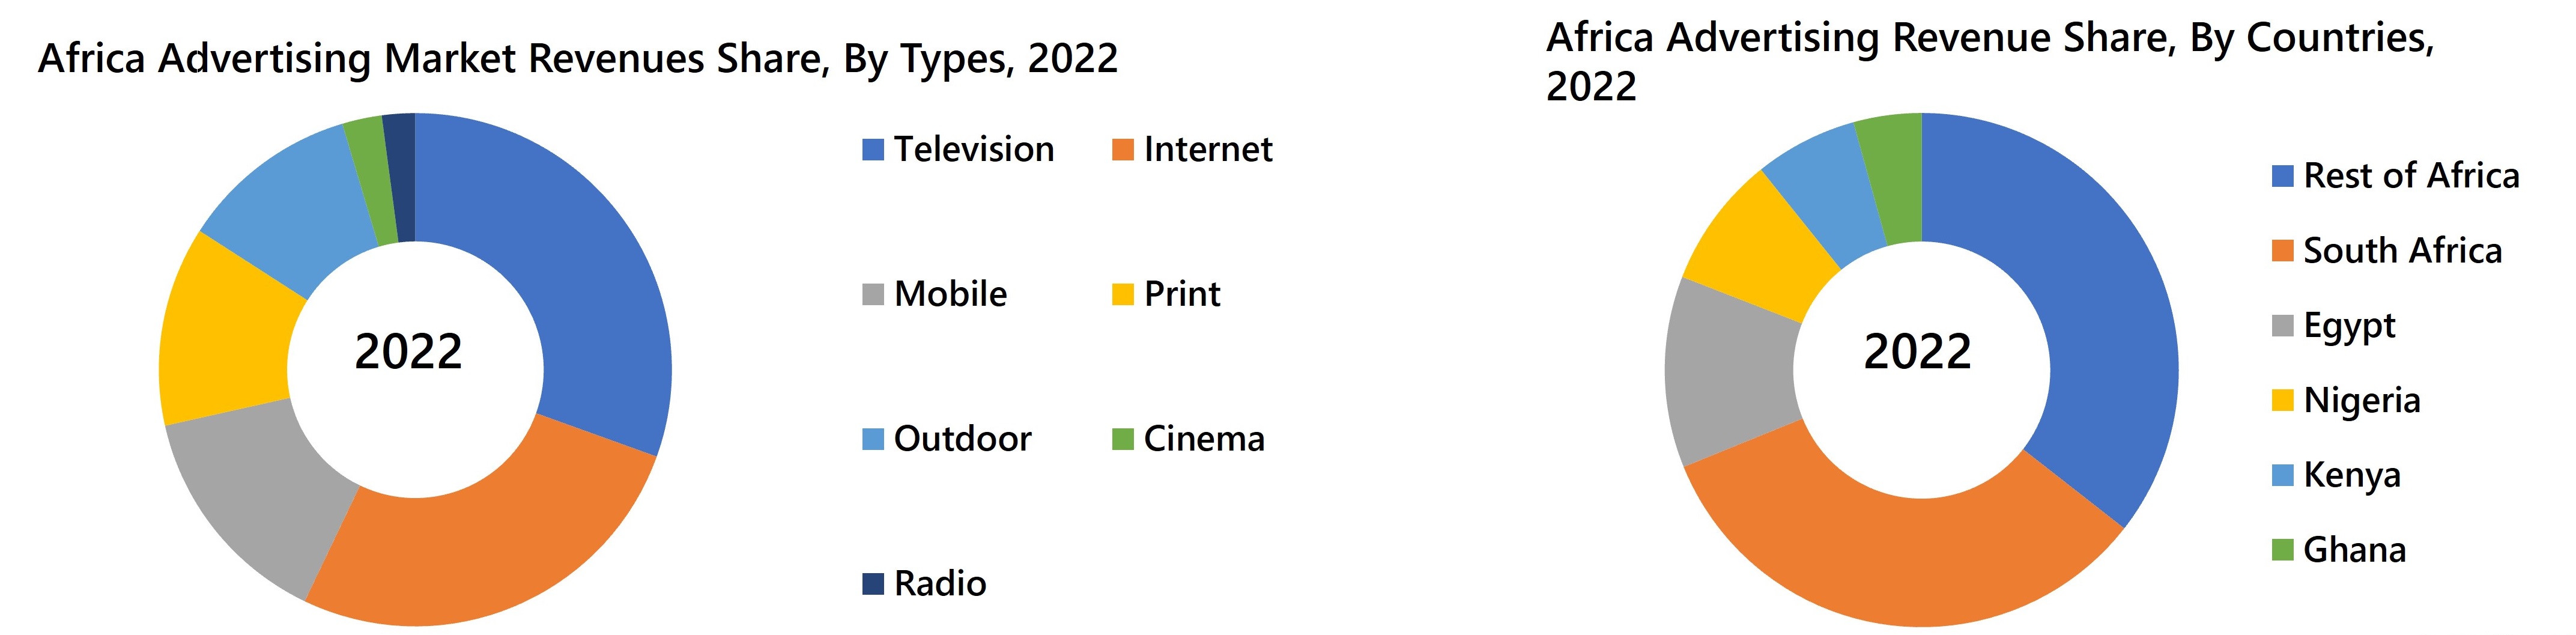 Africa Advertising Market Revenues Share